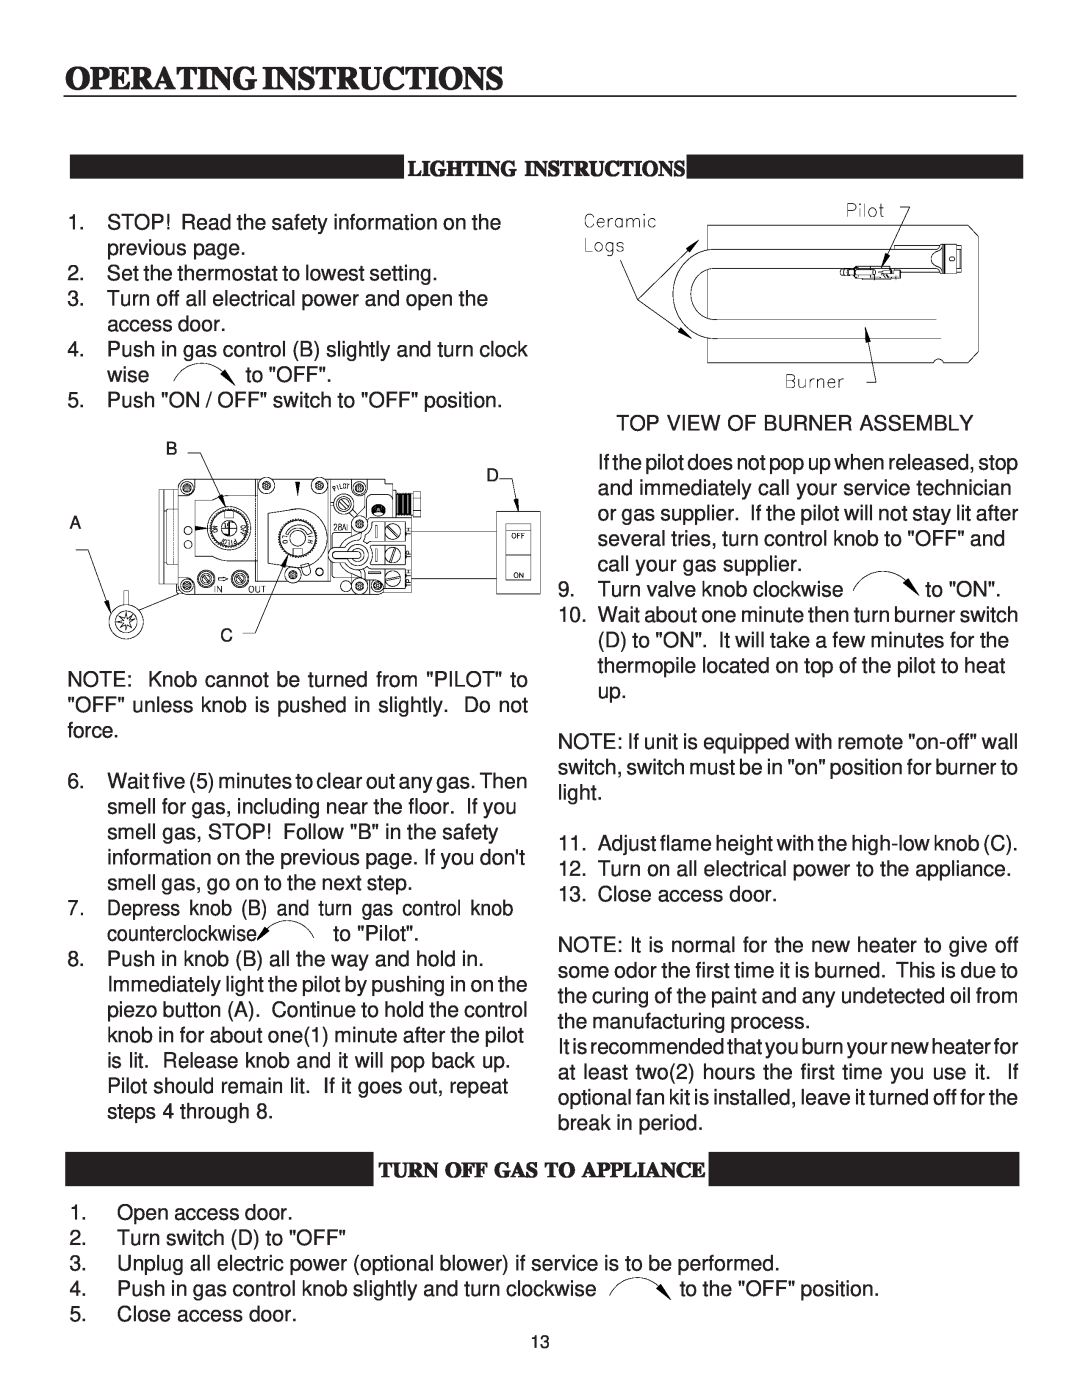 United States Stove B9945N manual Operating Instructions, Lighting Instructions, Turn Off Gas To Appliance 